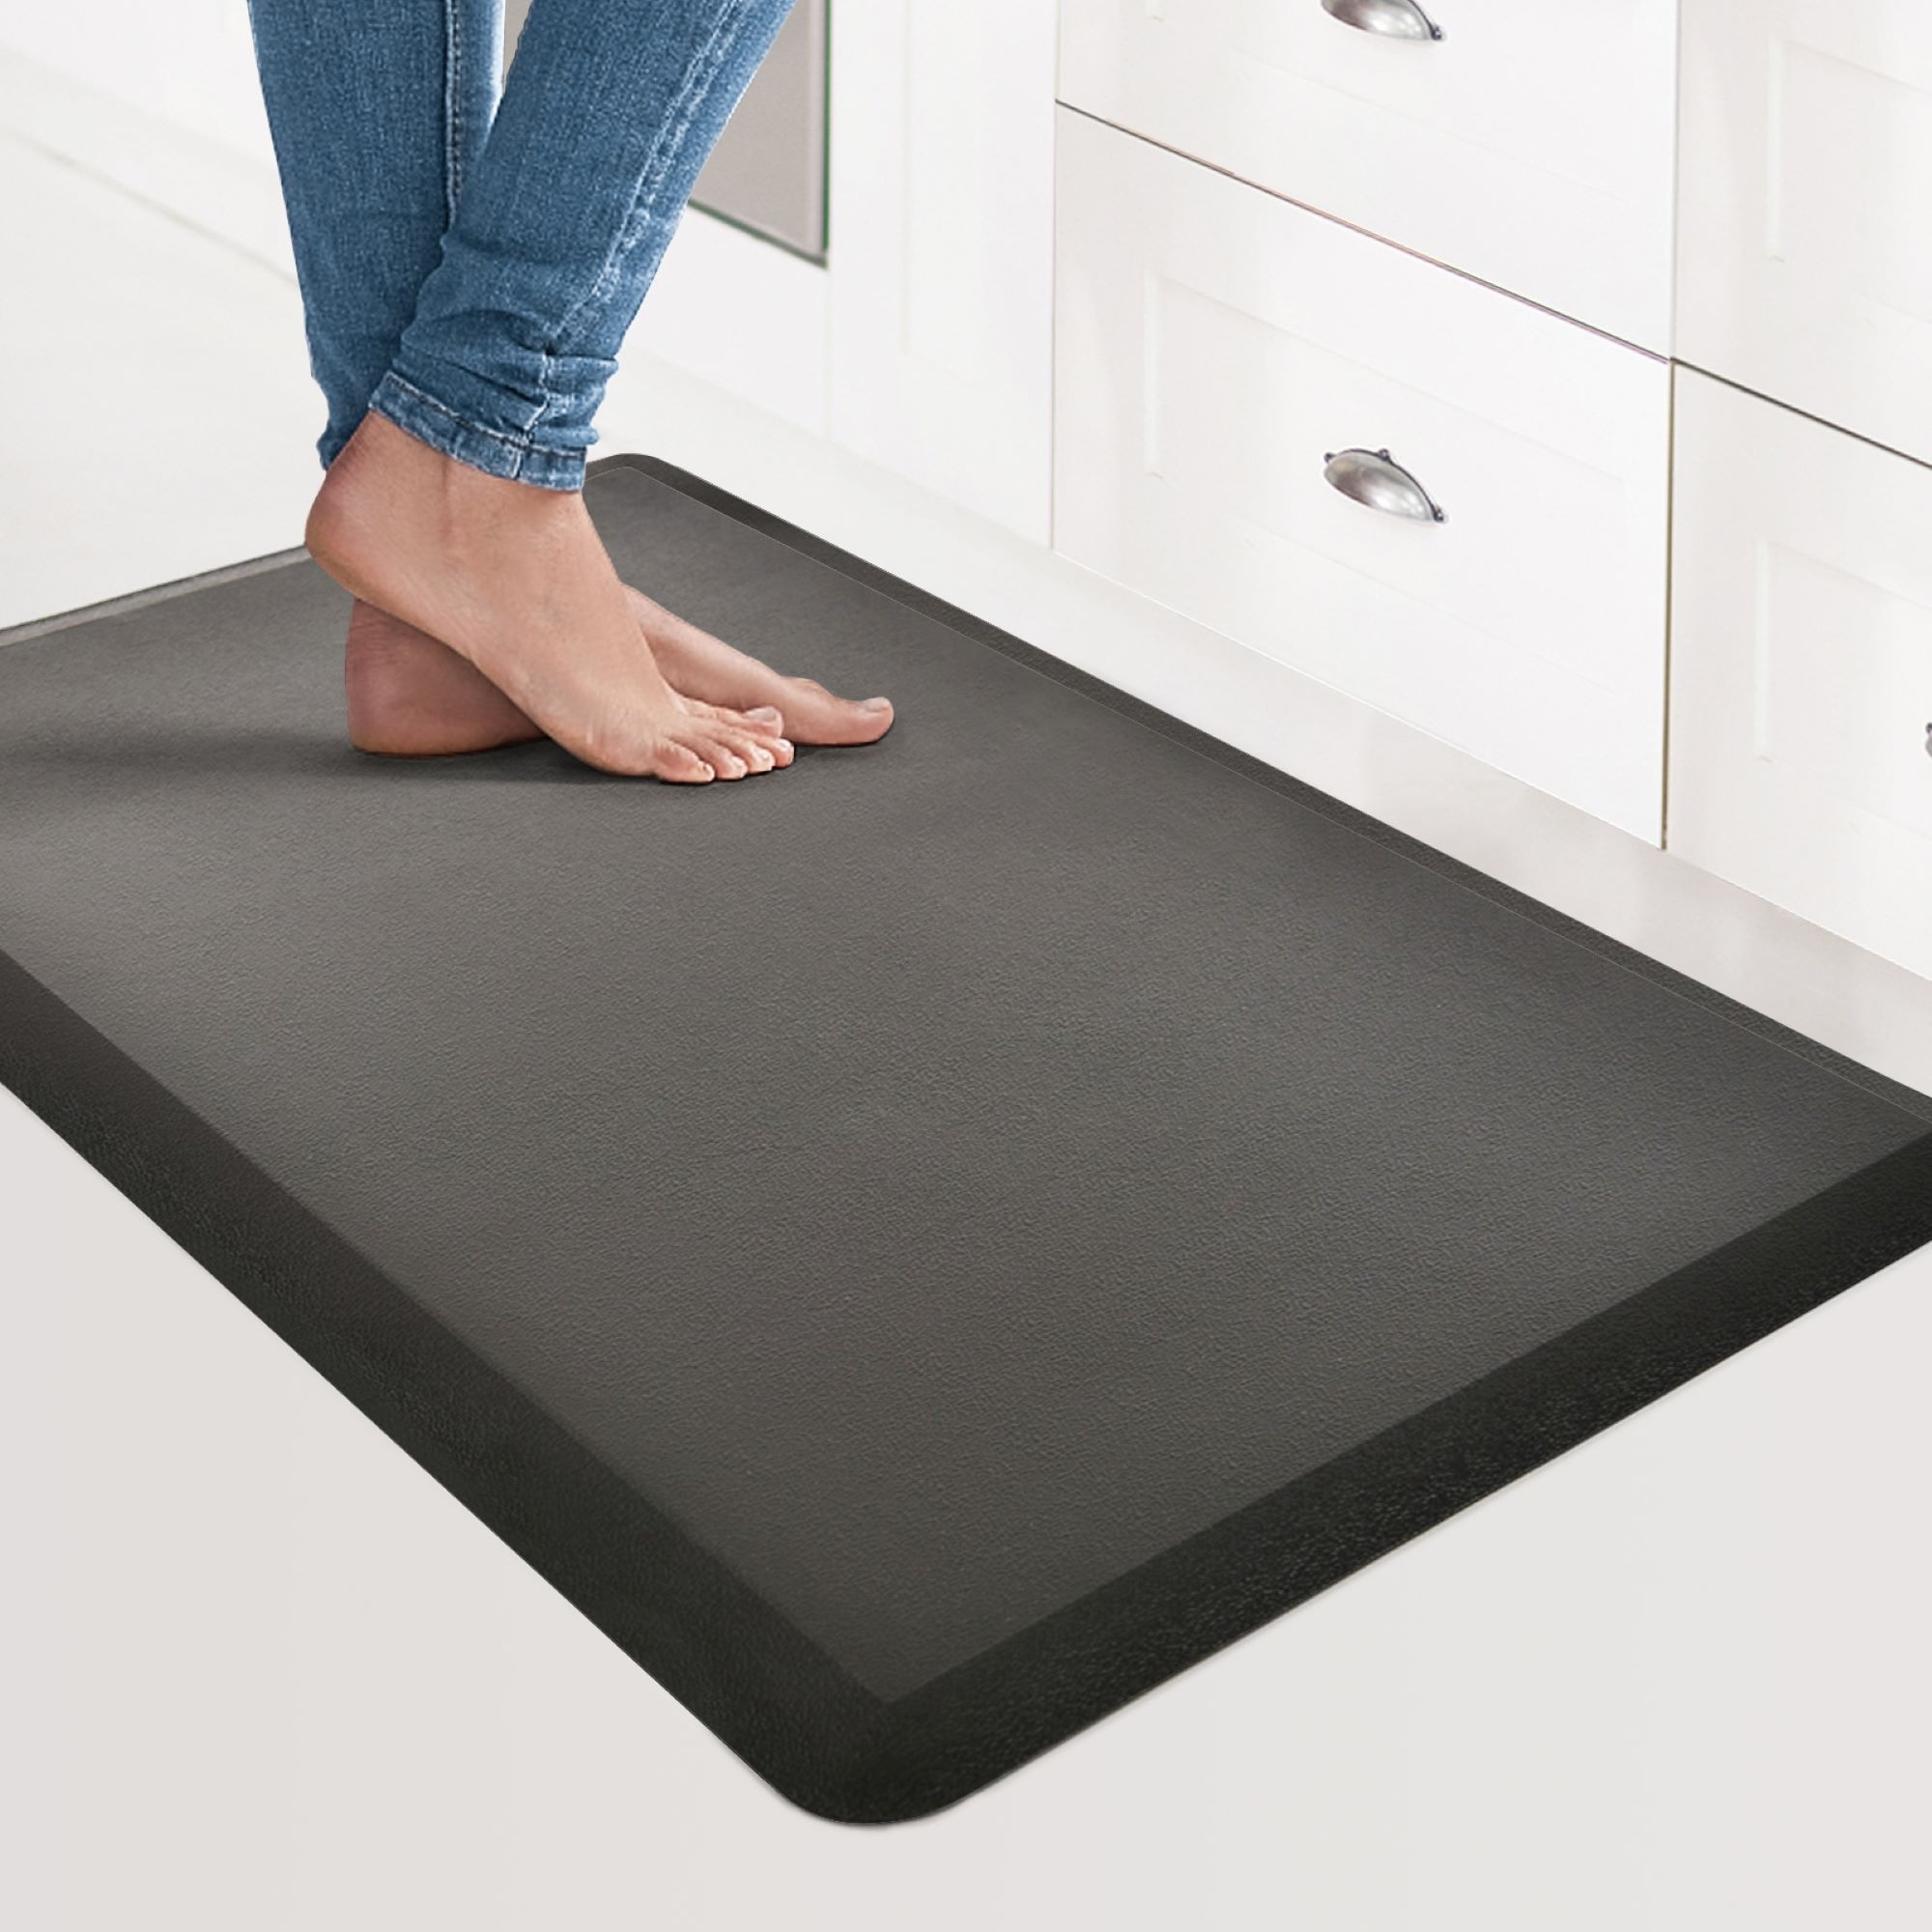 FEATOL Anti Fatigue Comfort Mat – Thick Non-Slip Bottom Kitchen Mat for  Office Stand Desk, Kitchens, and Garages - Relieves Foot, Knee, and Back  Pain